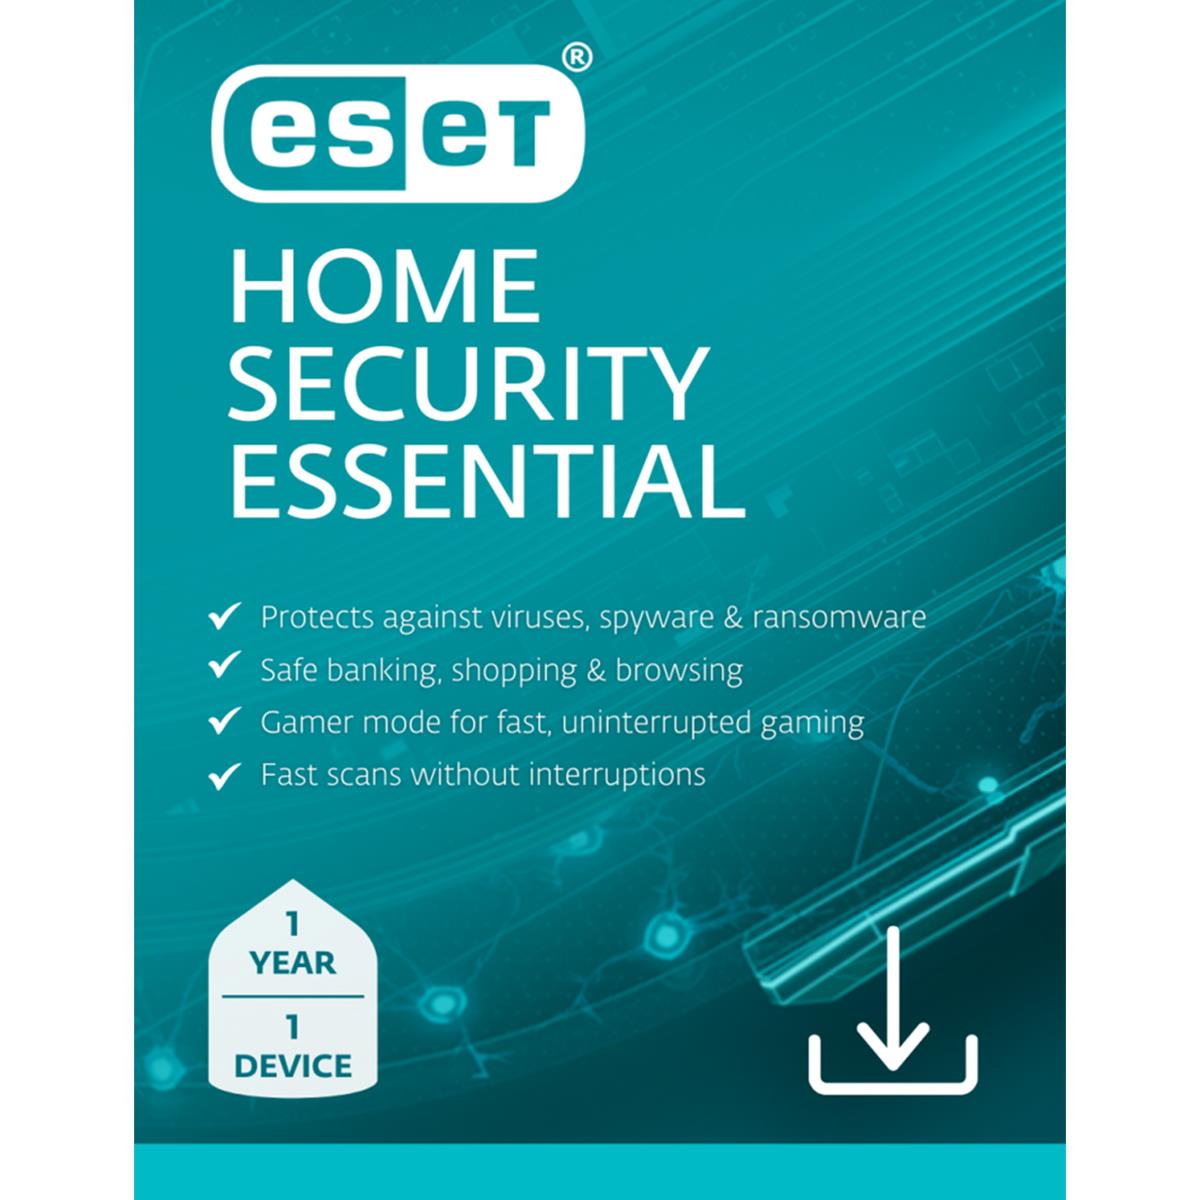 Image of ESET Essential 1 Year Home Security 1 Device